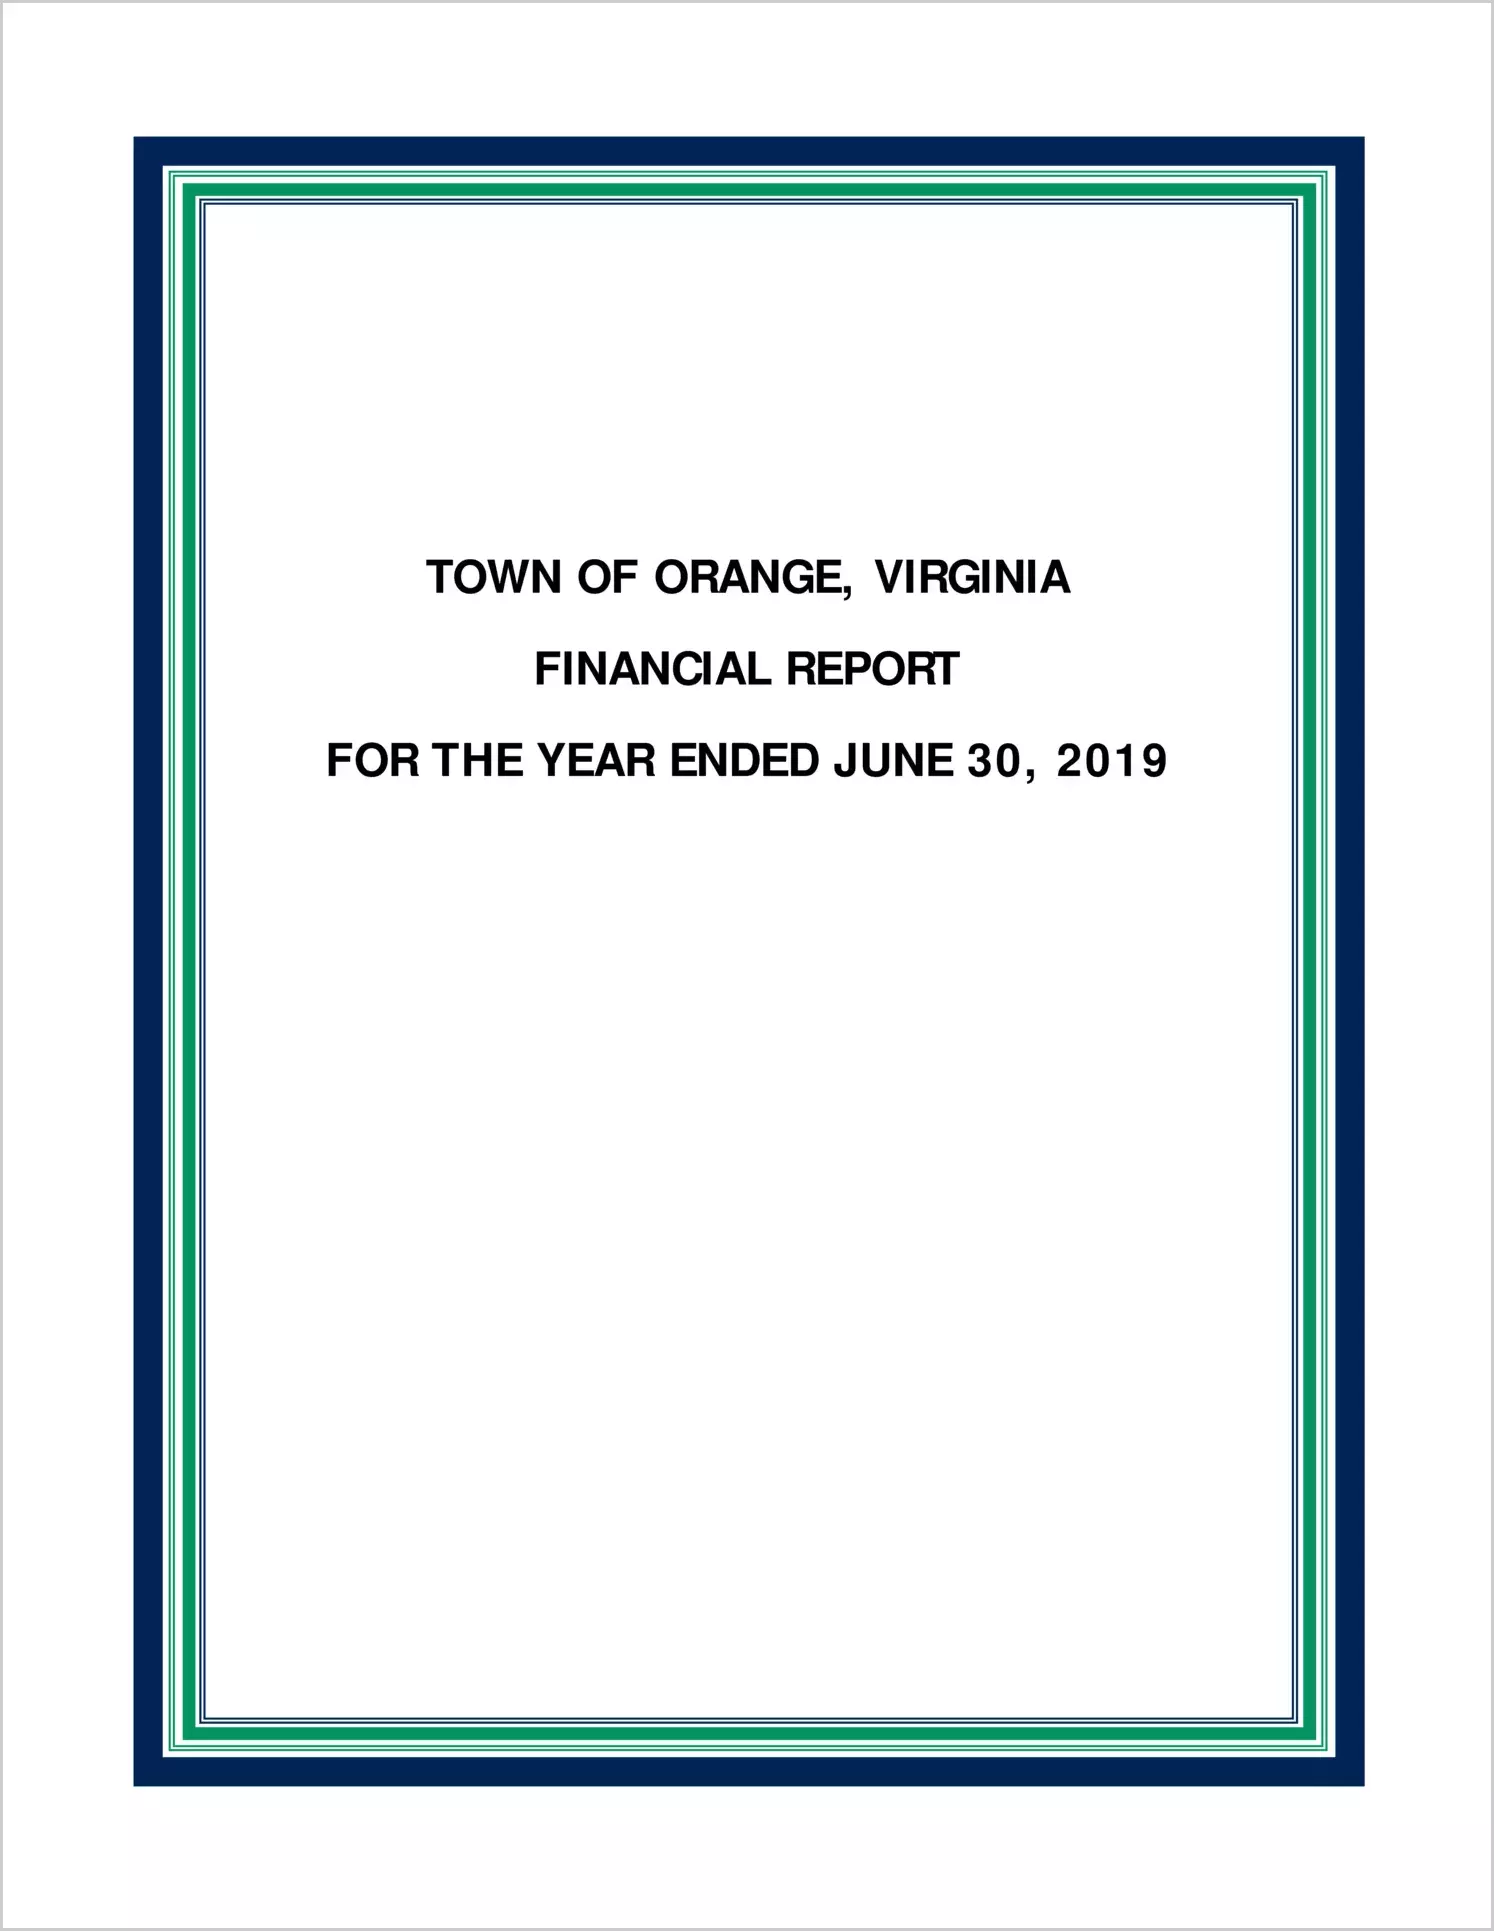 2019 Annual Financial Report for Town of Orange